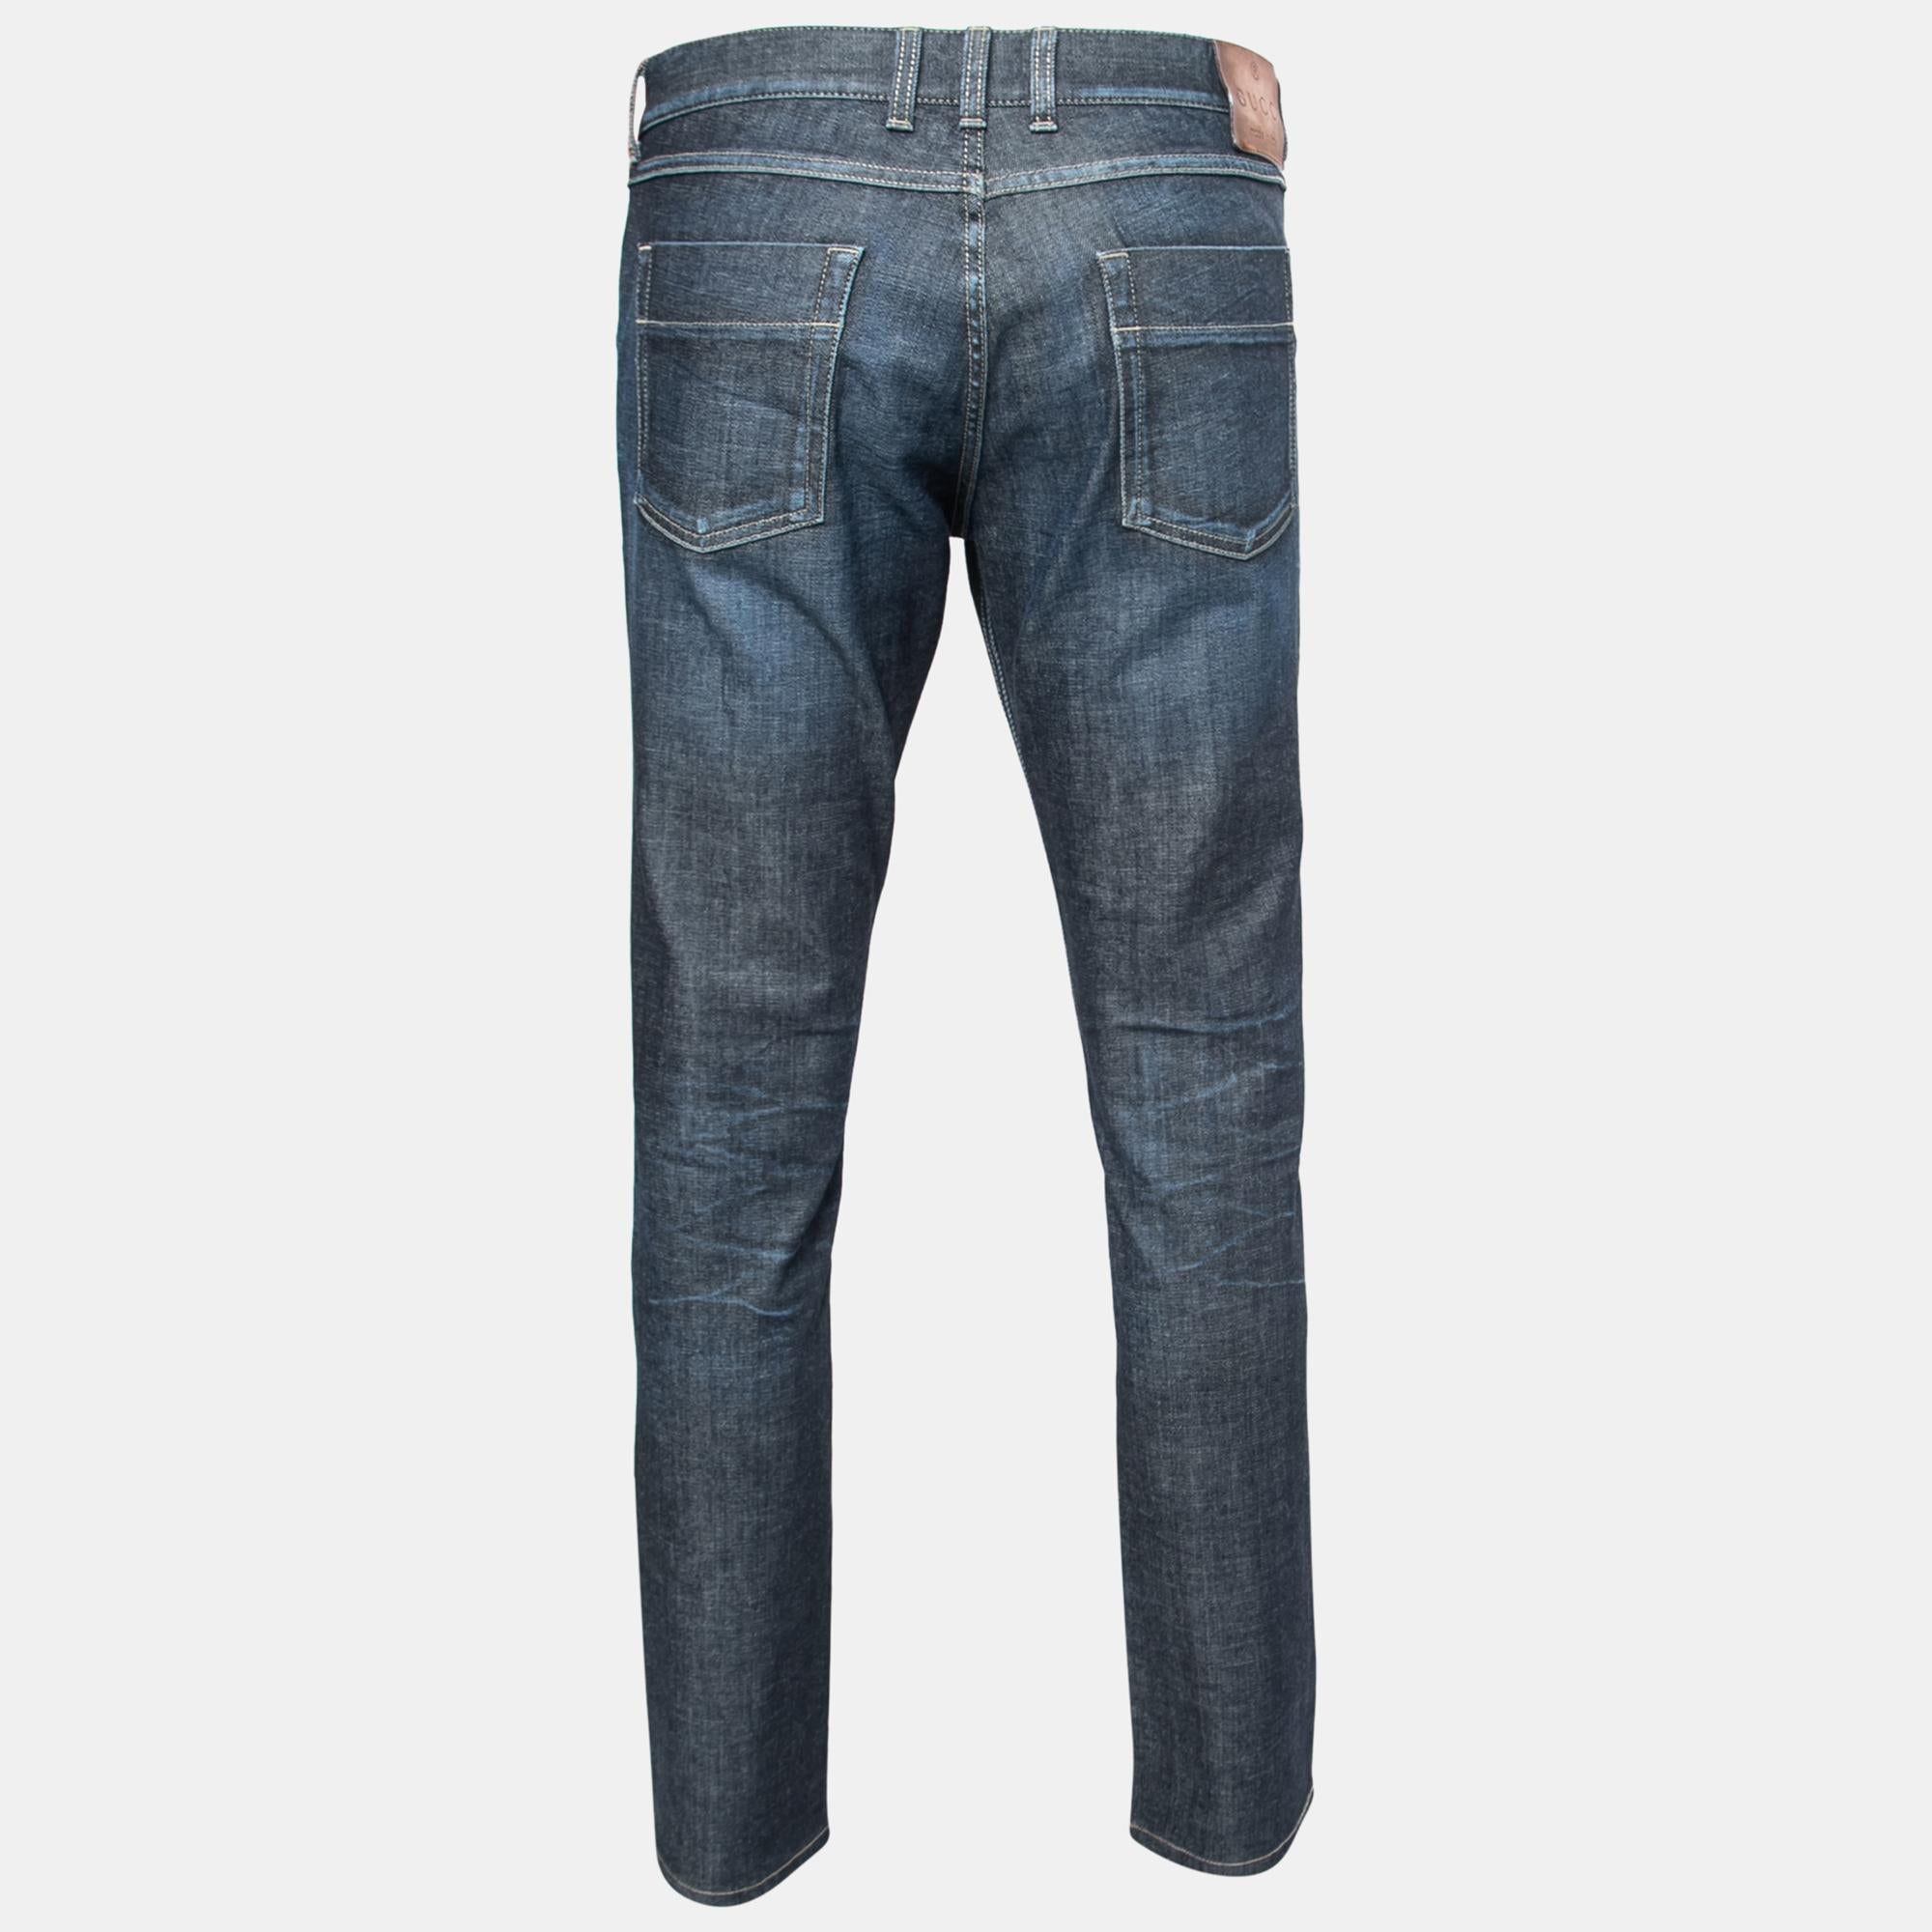 These Gucci men's jeans are a must-have wardrobe essential. These blue denim jeans can be dressed both up and down for looks that are either casual and comfy or smart and fashionable.

